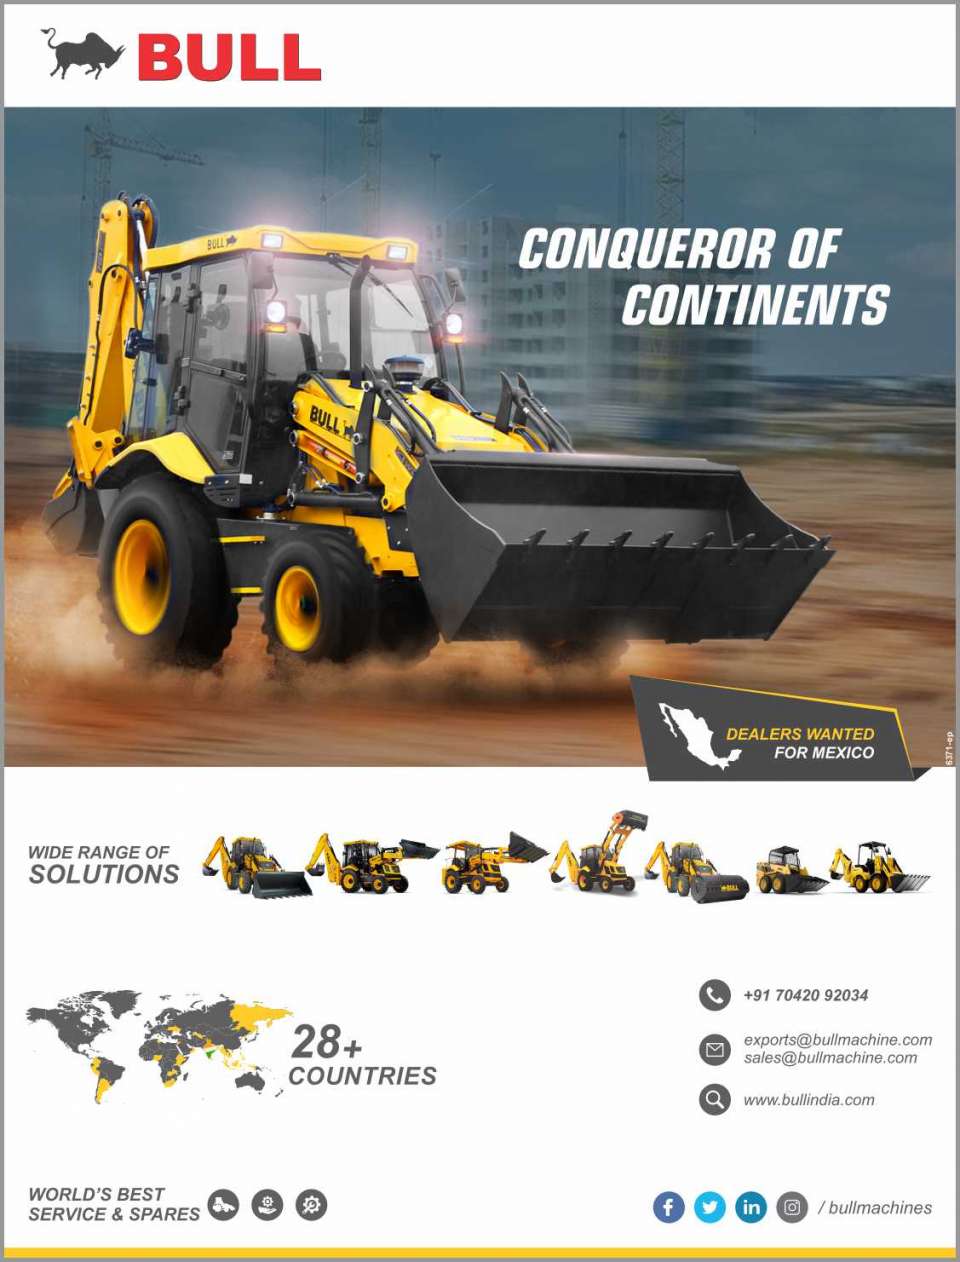 Manufacturer of Backhoes, Attachments and Construction Machinery located in India, Searching for Dealers in Mexico